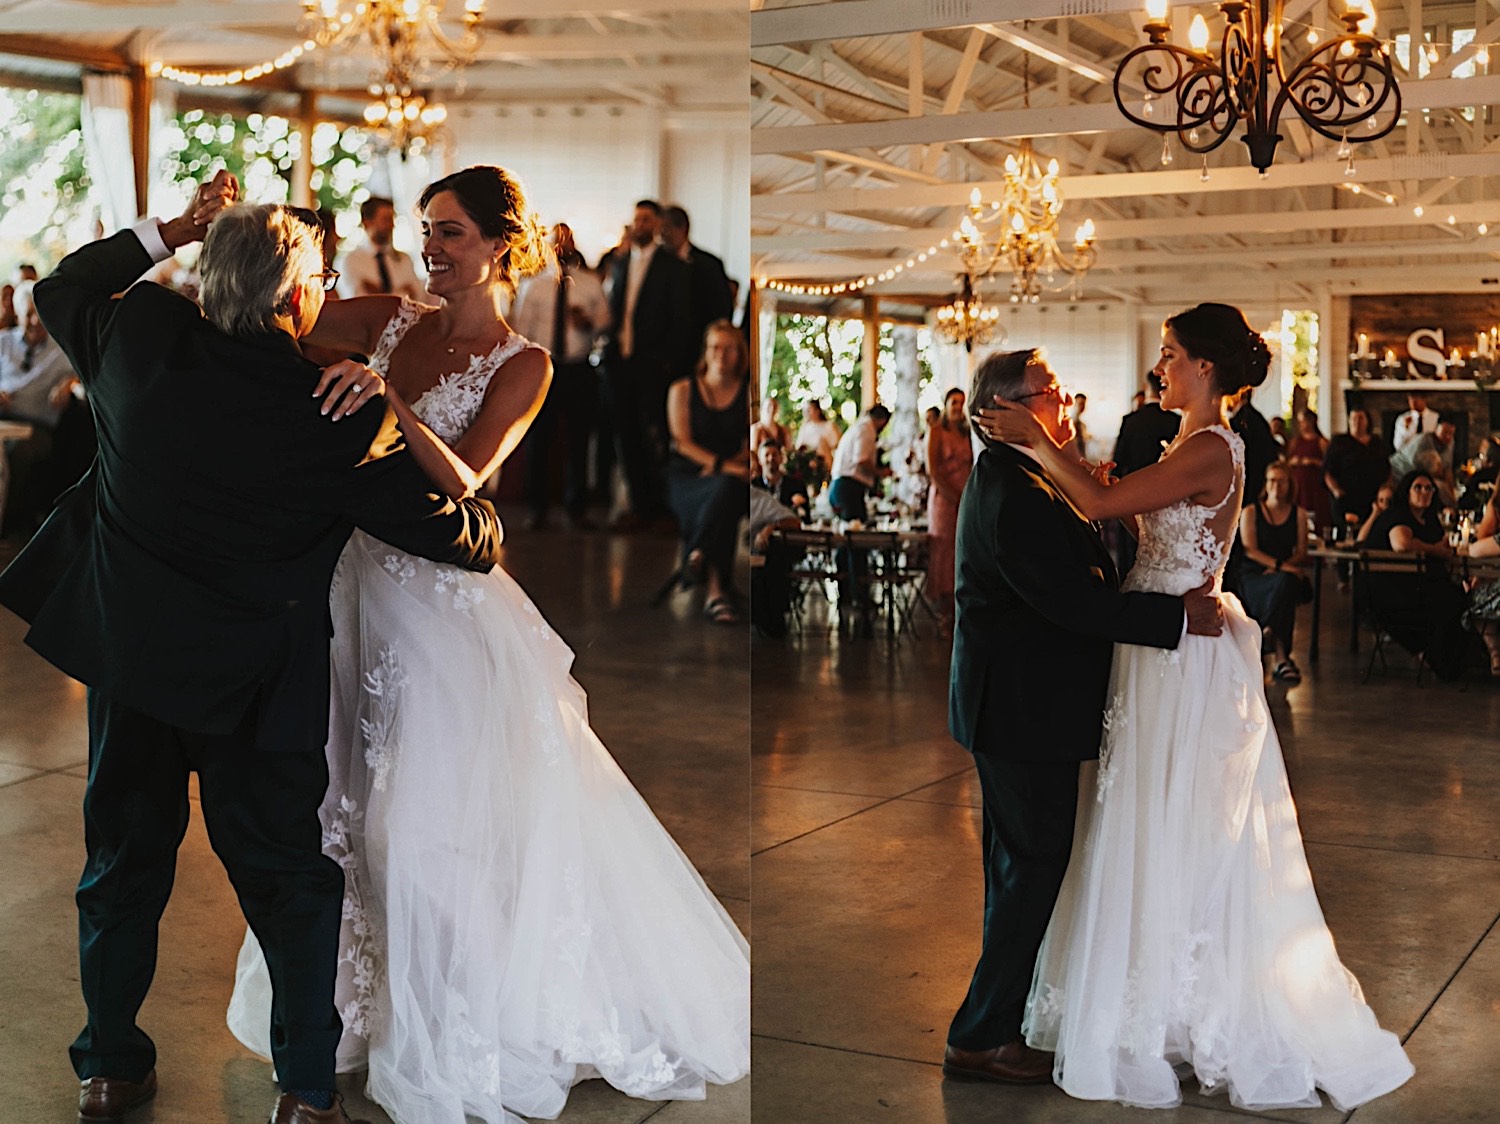 2 photos side by side of a bride dancing with her father during her wedding reception as the sun sets to the right